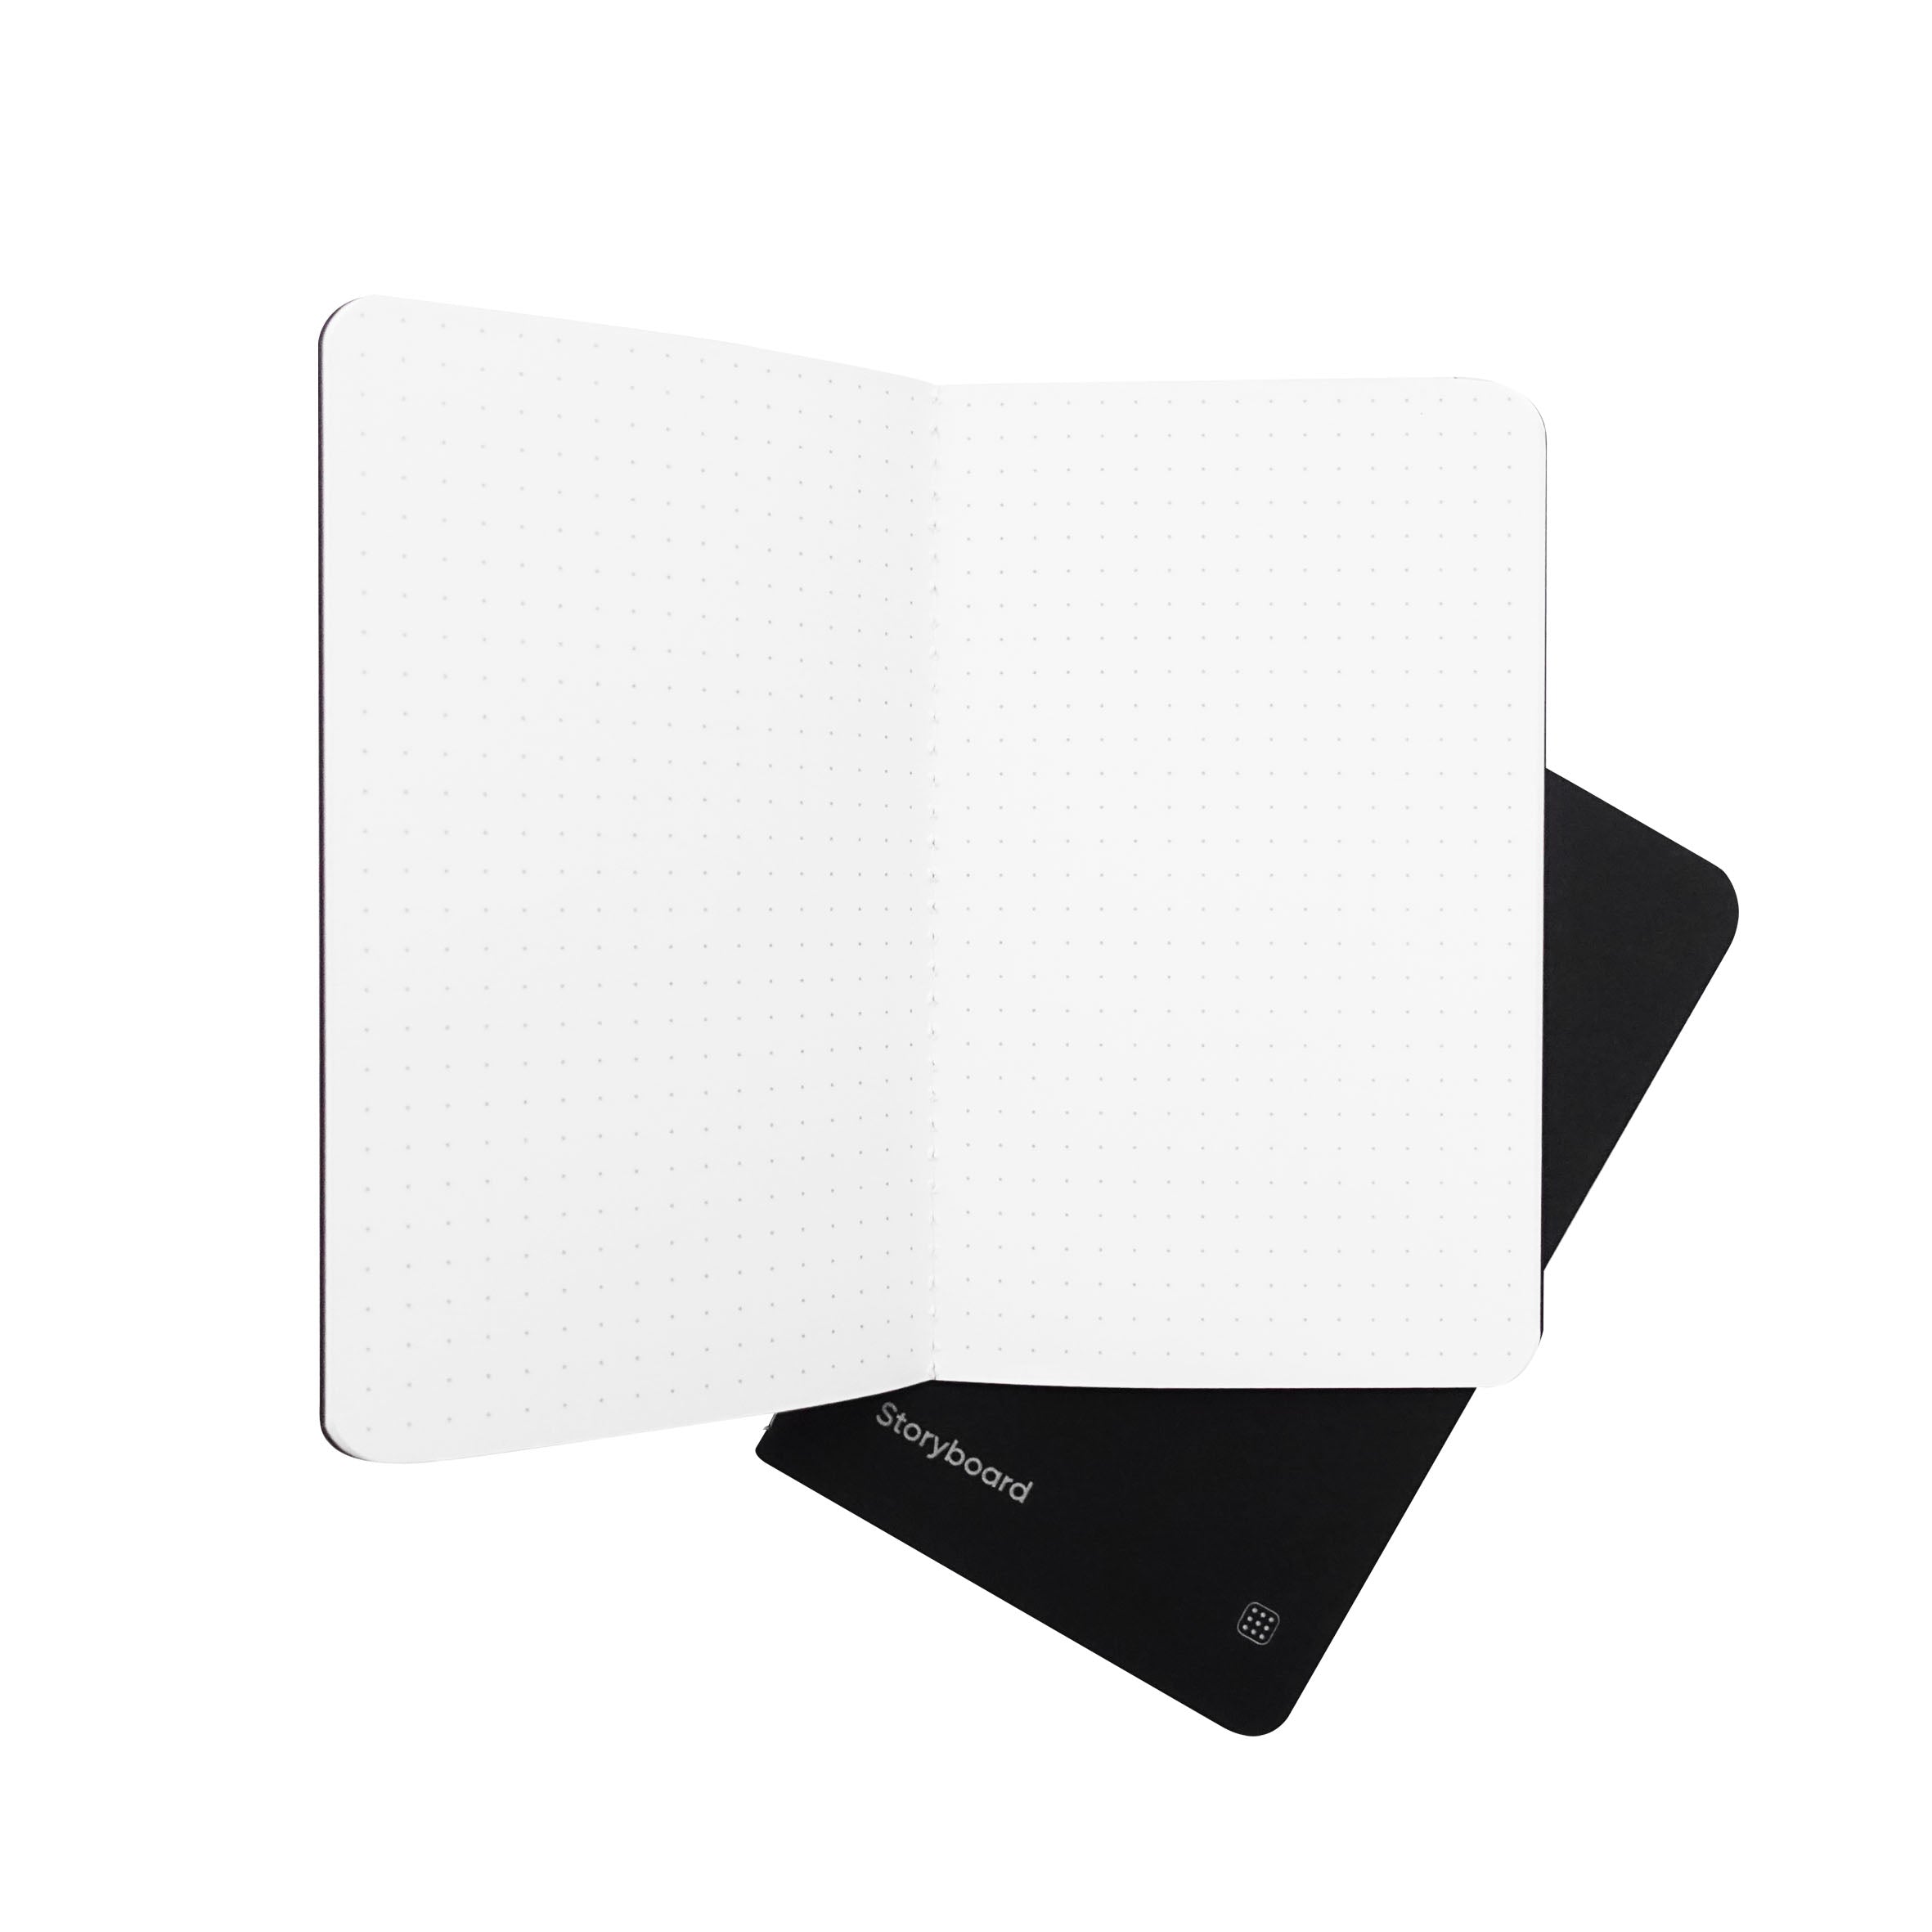 Endless Storyboard Pocket Notebooks with 68gsm Tomoe River Paper - 2 Pack